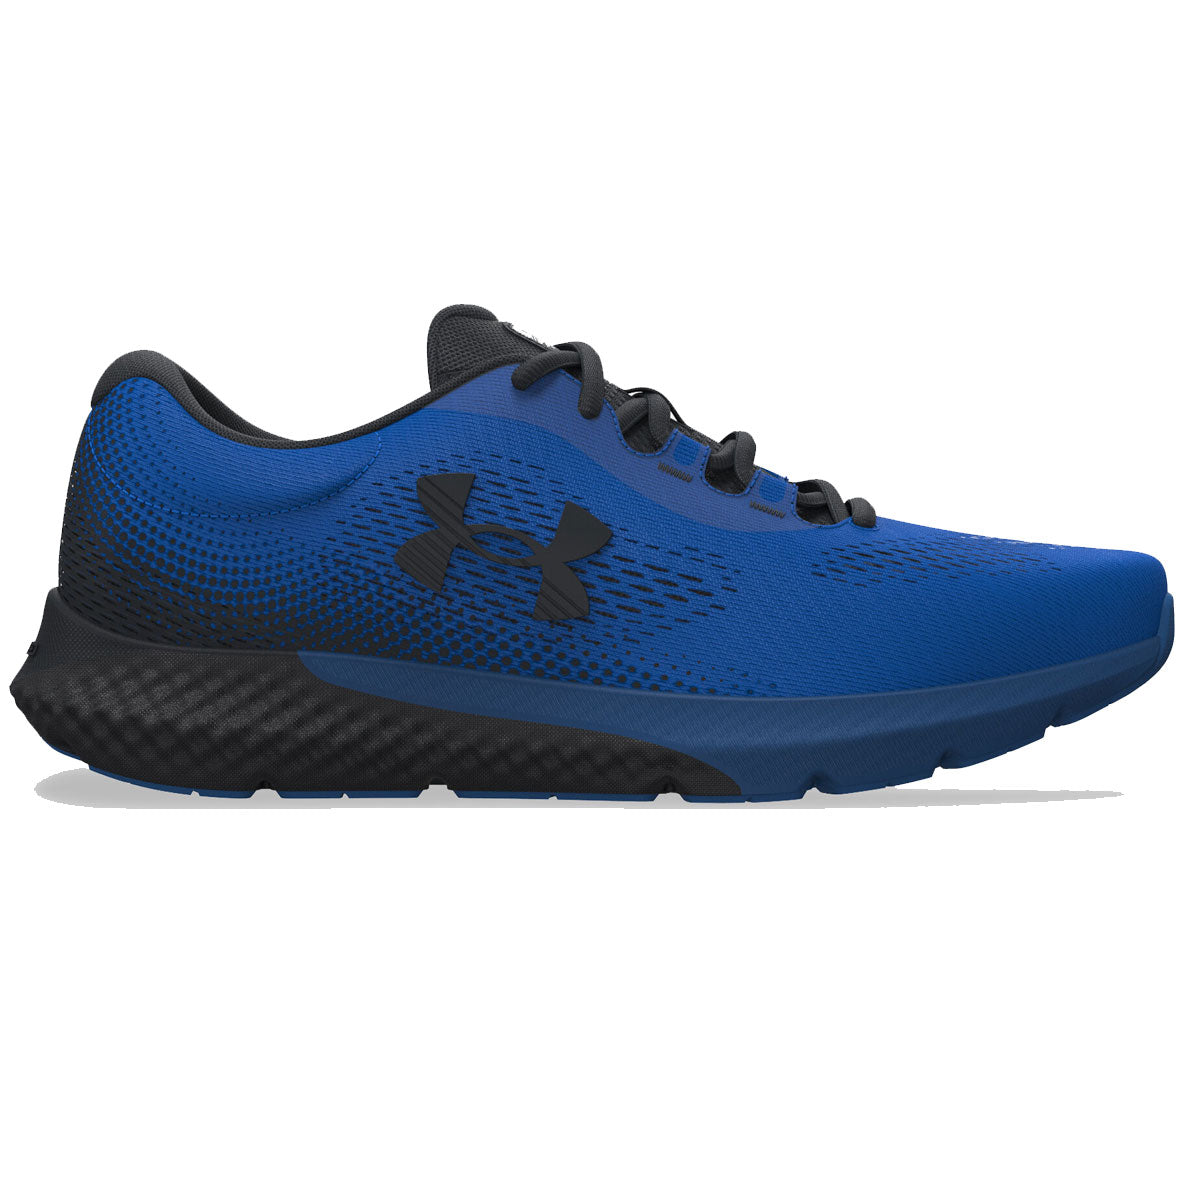 Under Armour Charged Rogue 4 Running Shoes - Mens - Blue/Black